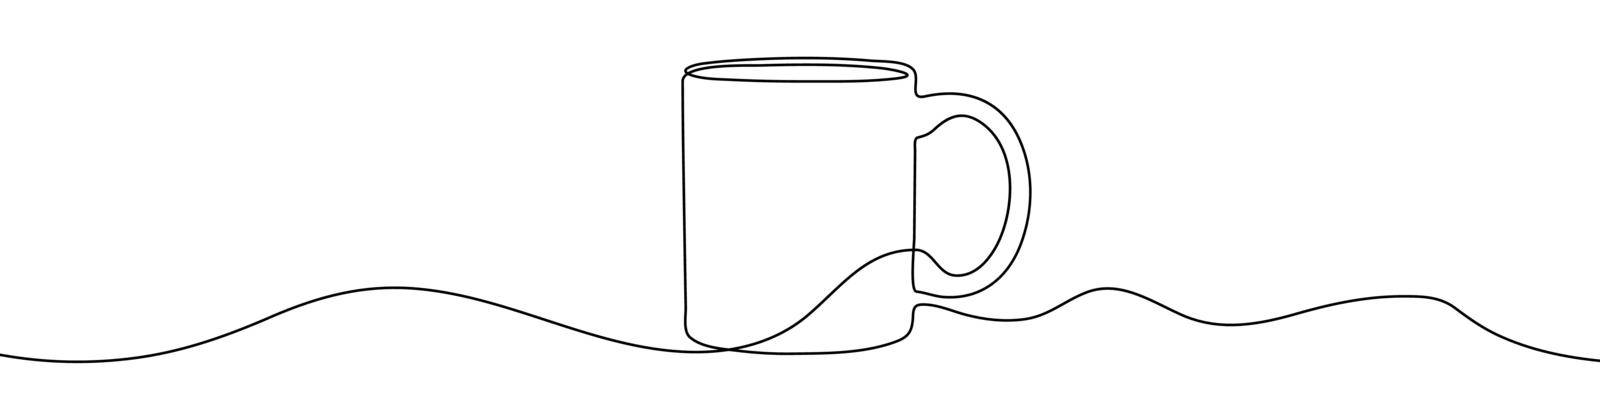 Continuous line drawing of cup. The mug one line icon. One line drawing background. Vector illustration. Cup black icon